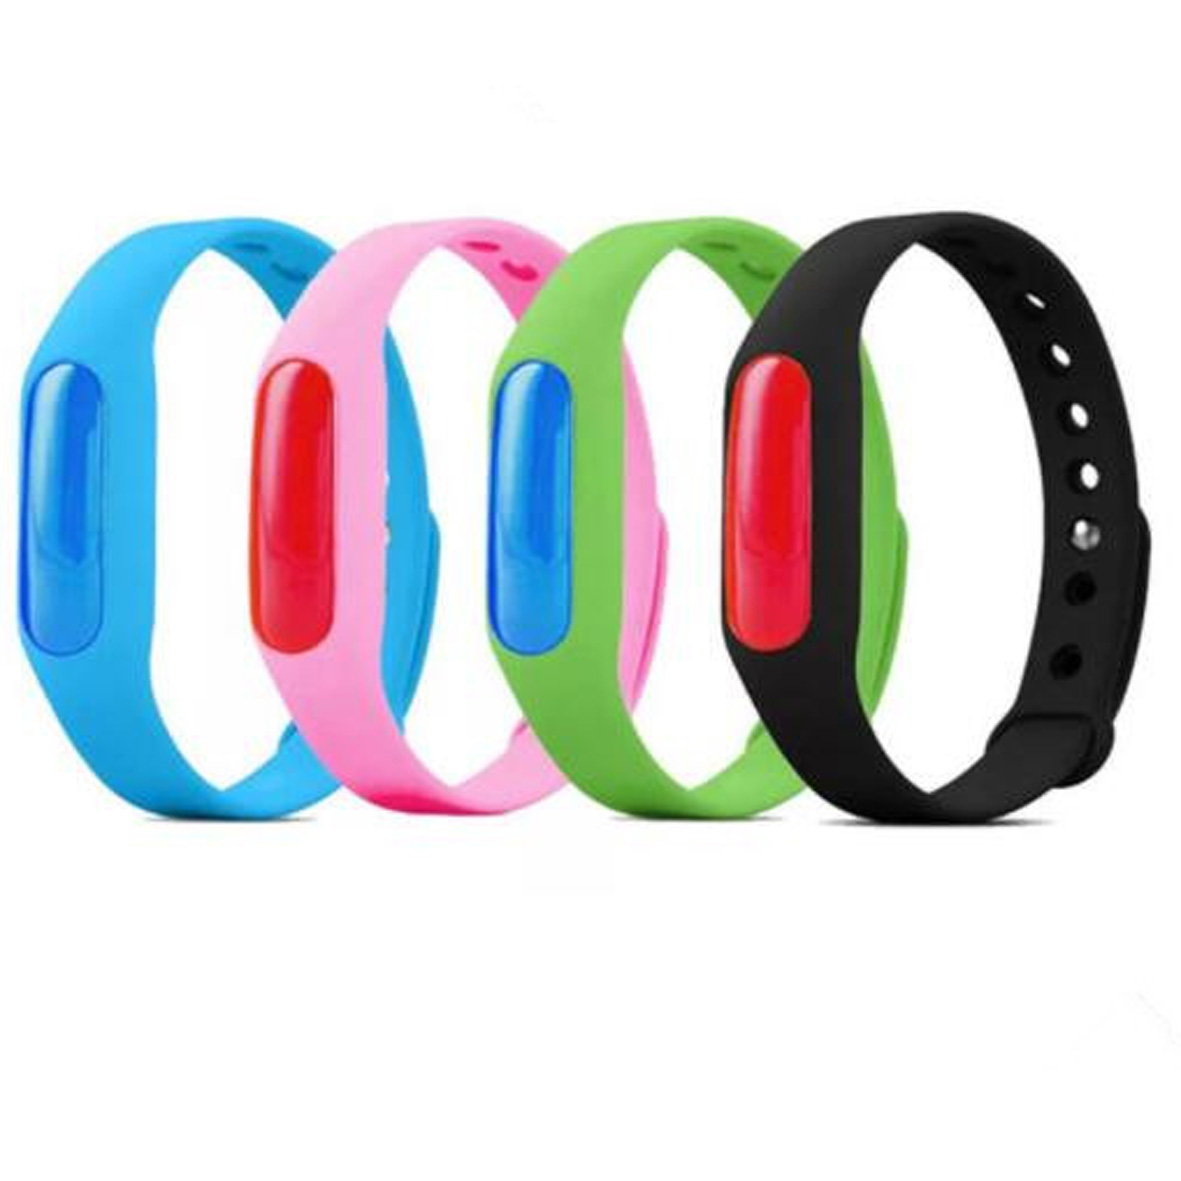 GL-ELY1061 Mosquito Repellent Wrist Band